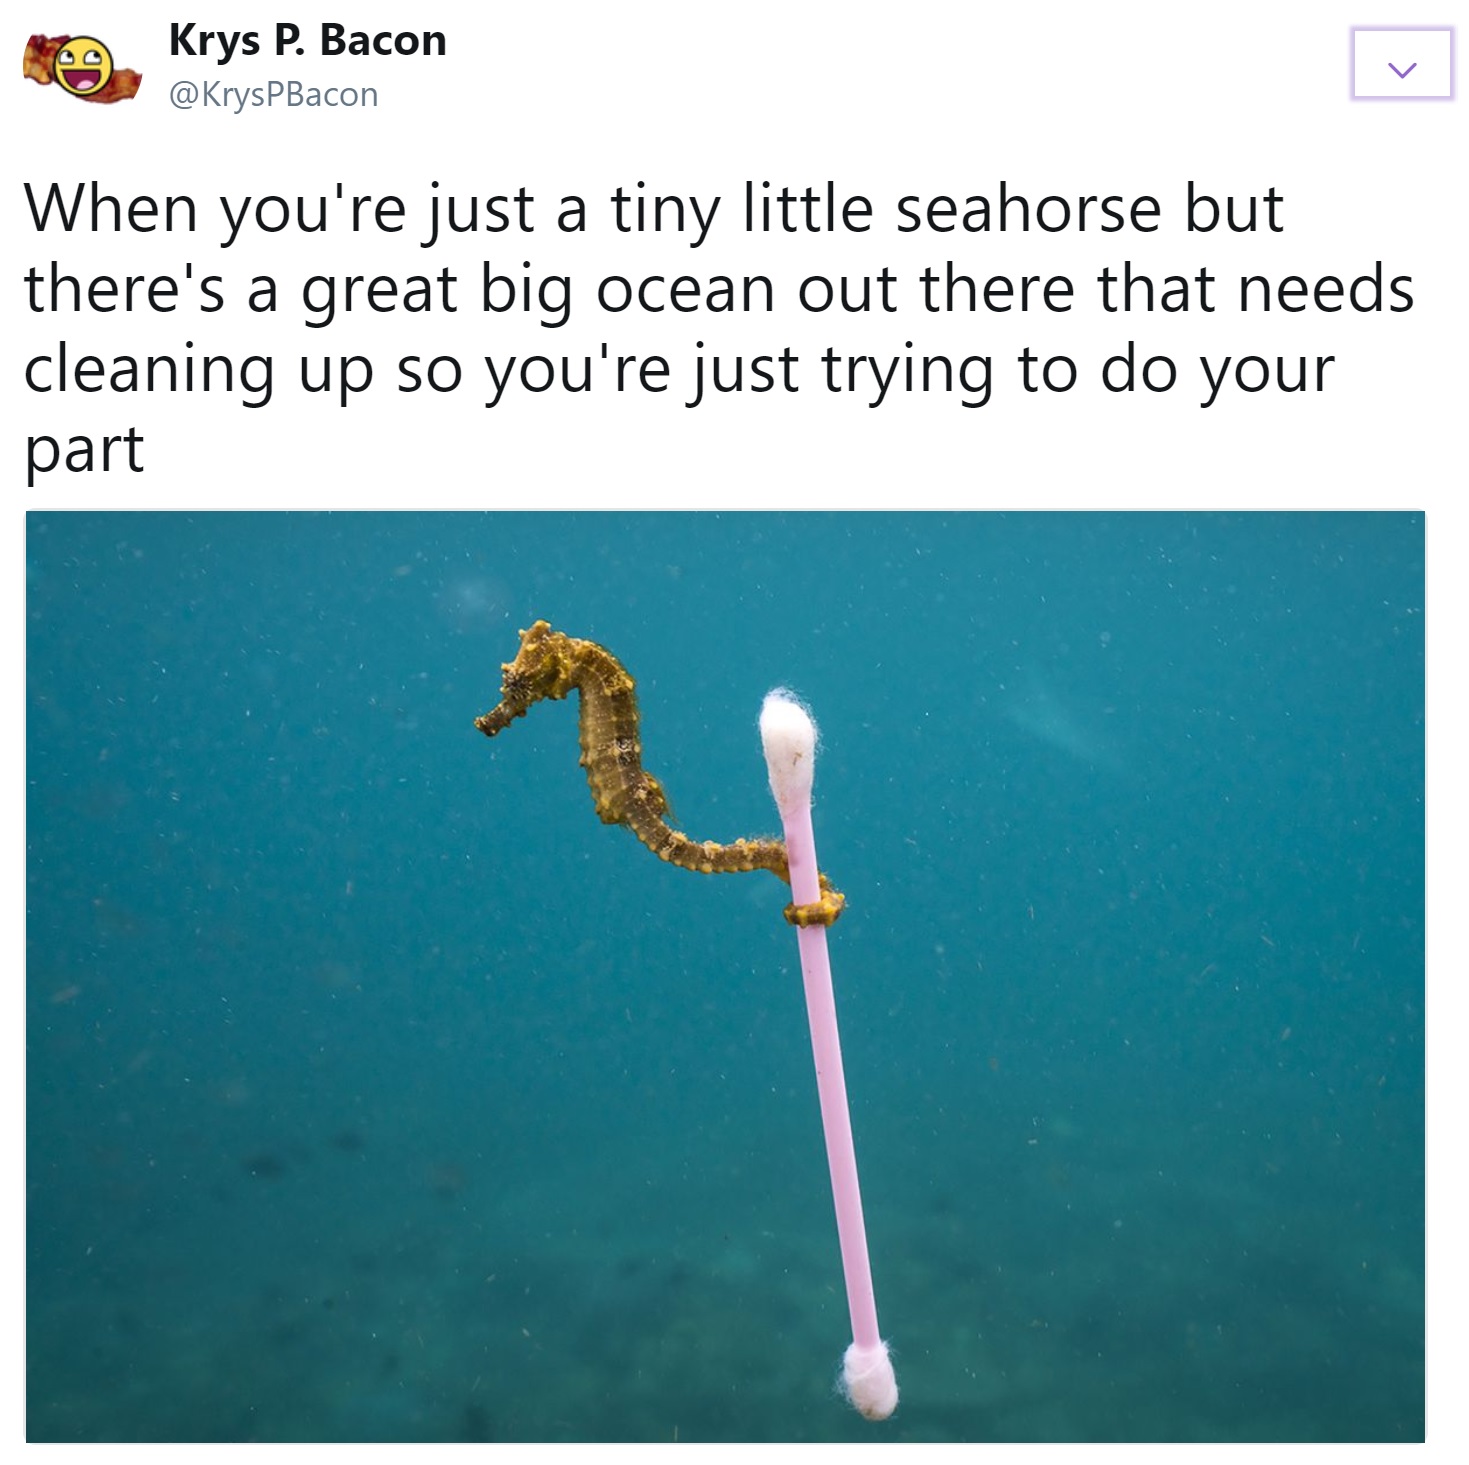 memes - seahorse cleaning the ocean - Krys P. Bacon When you're just a tiny little seahorse but there's a great big ocean out there that needs cleaning up so you're just trying to do your part